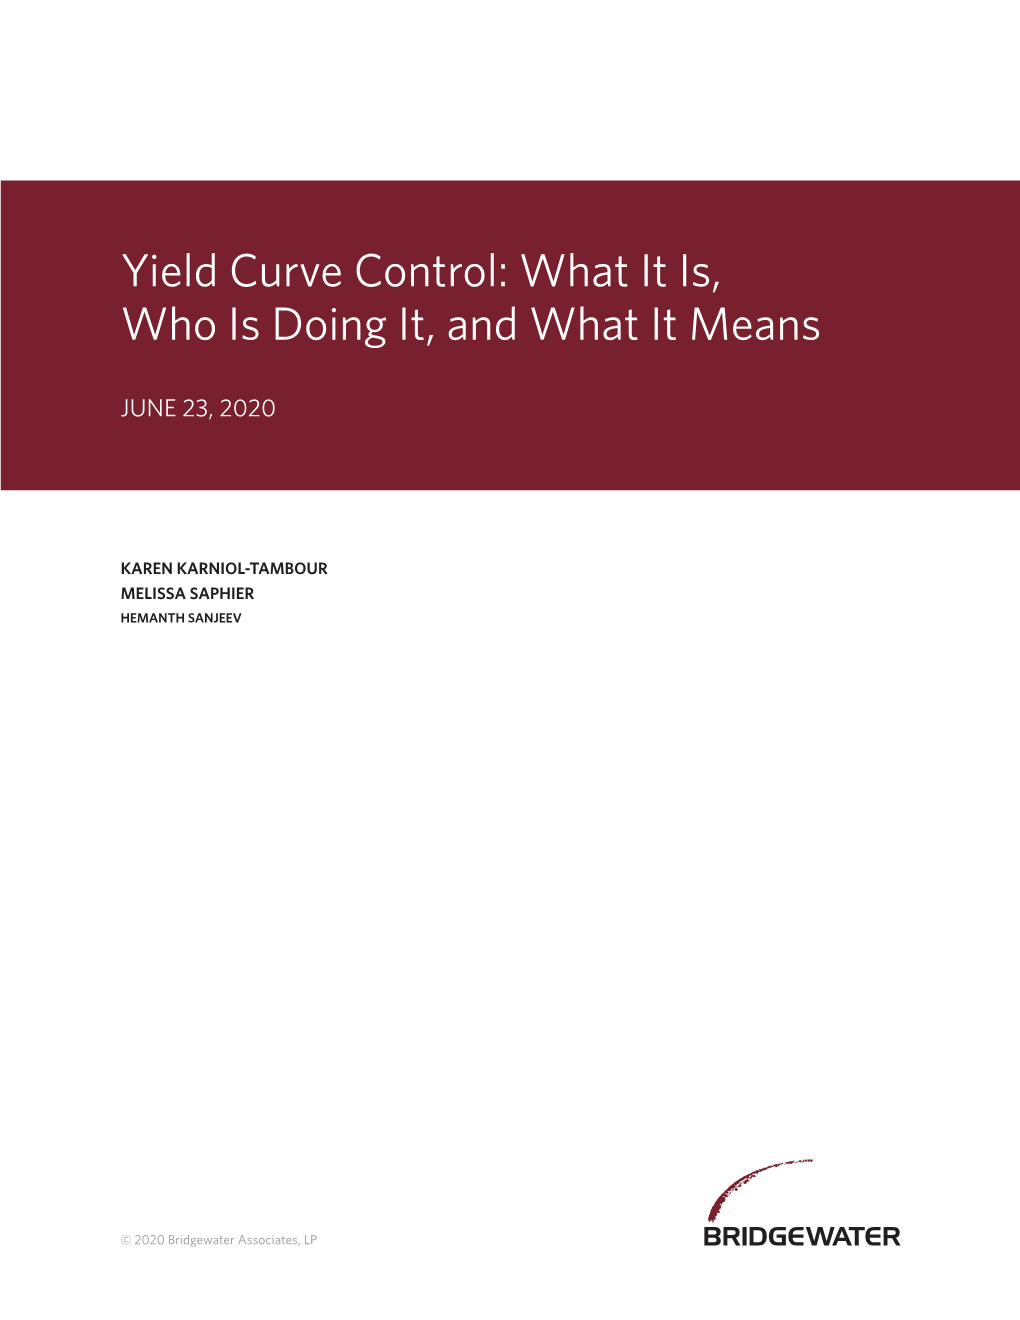 Yield Curve Control: What It Is, Who Is Doing It, and What It Means